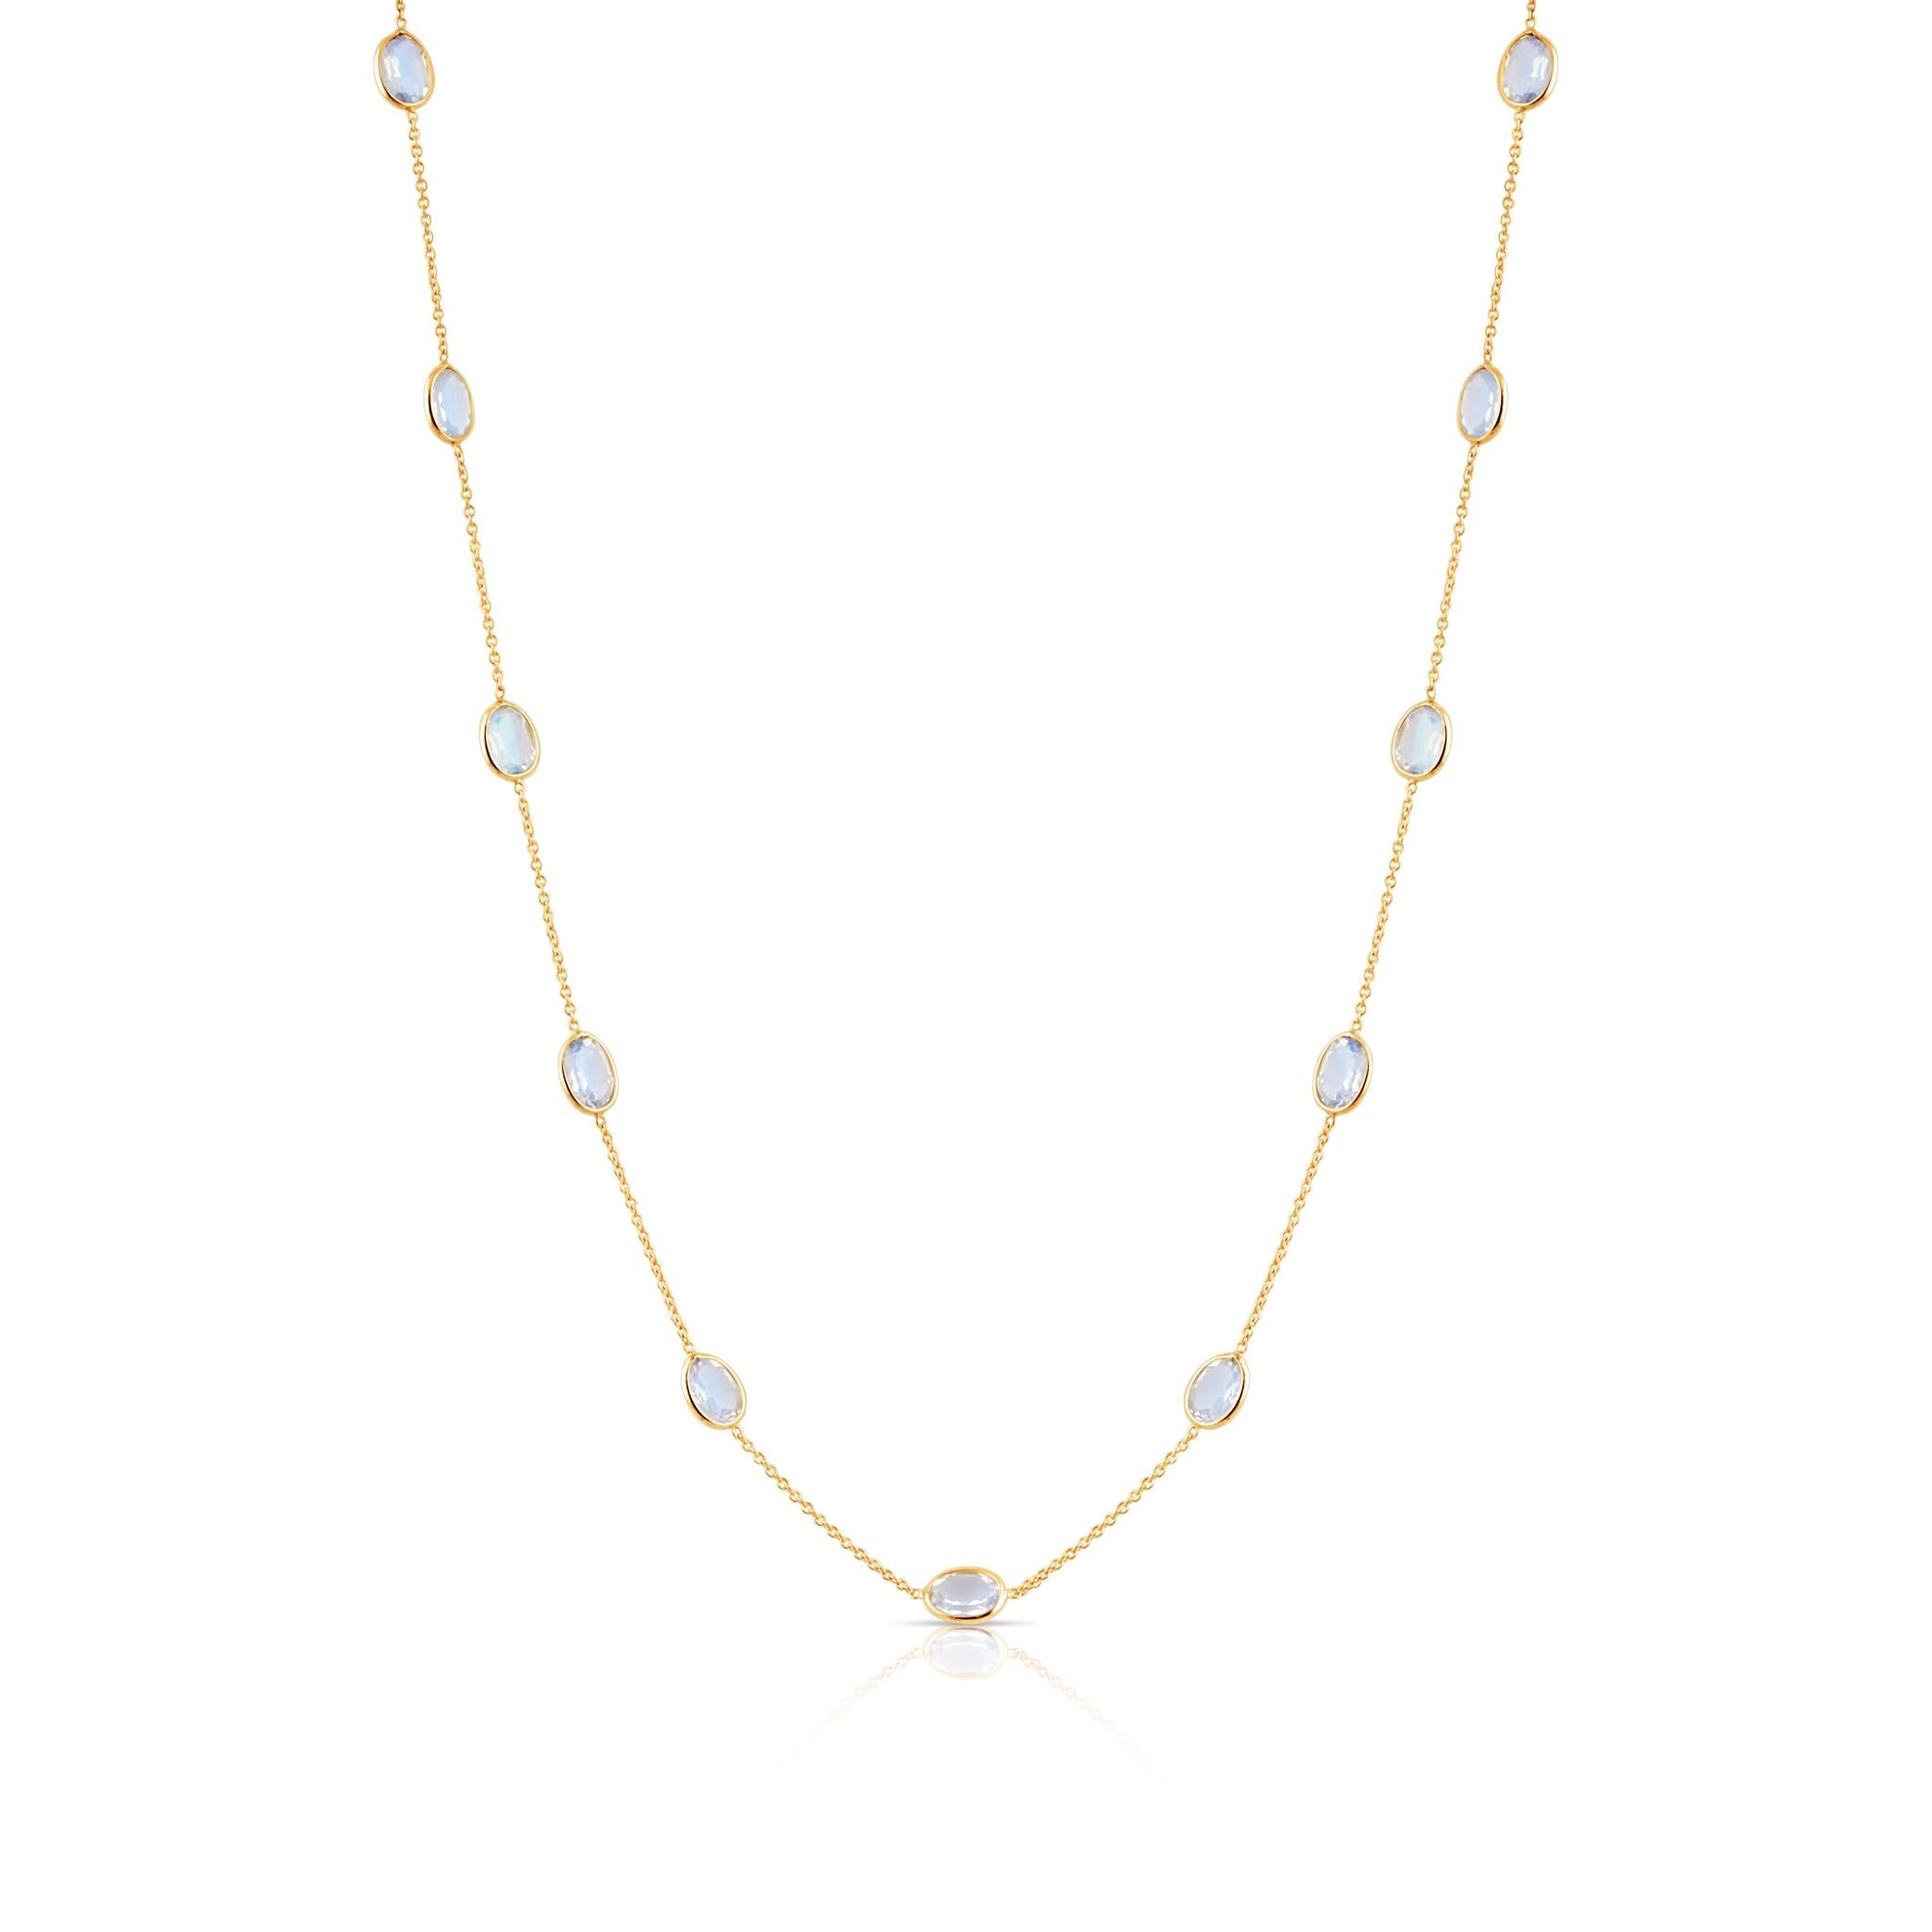 Tresor Beautiful Necklace features 8.20 carats of Rainbow Moonstone. The Necklace are an ode to the luxurious yet classic beauty with sparkly gemstones and feminine hues. Their contemporary and modern design make them versatile in their use. The